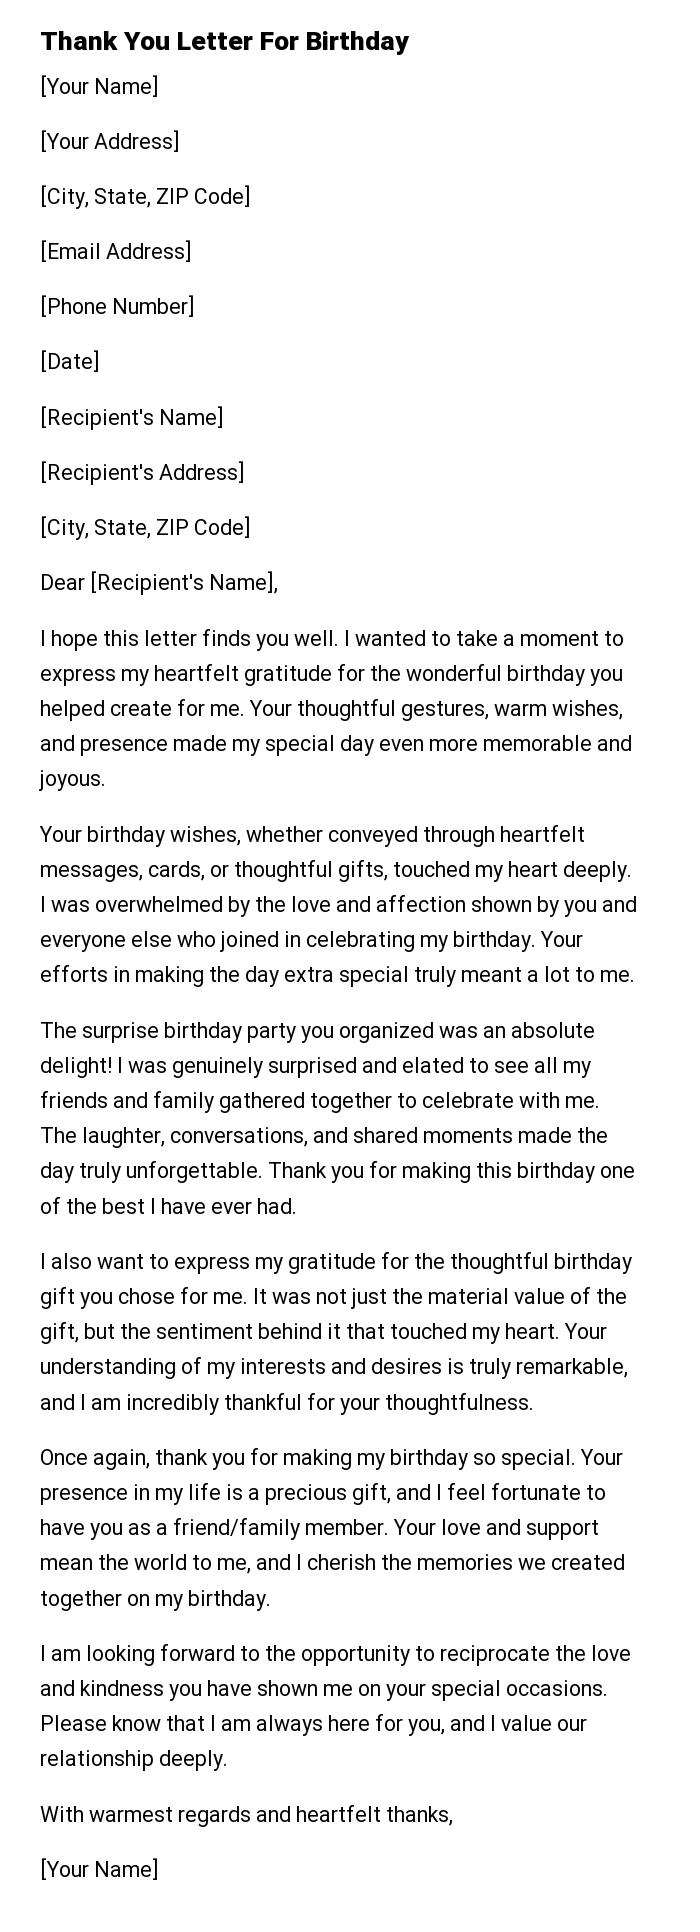 Thank You Letter For Birthday